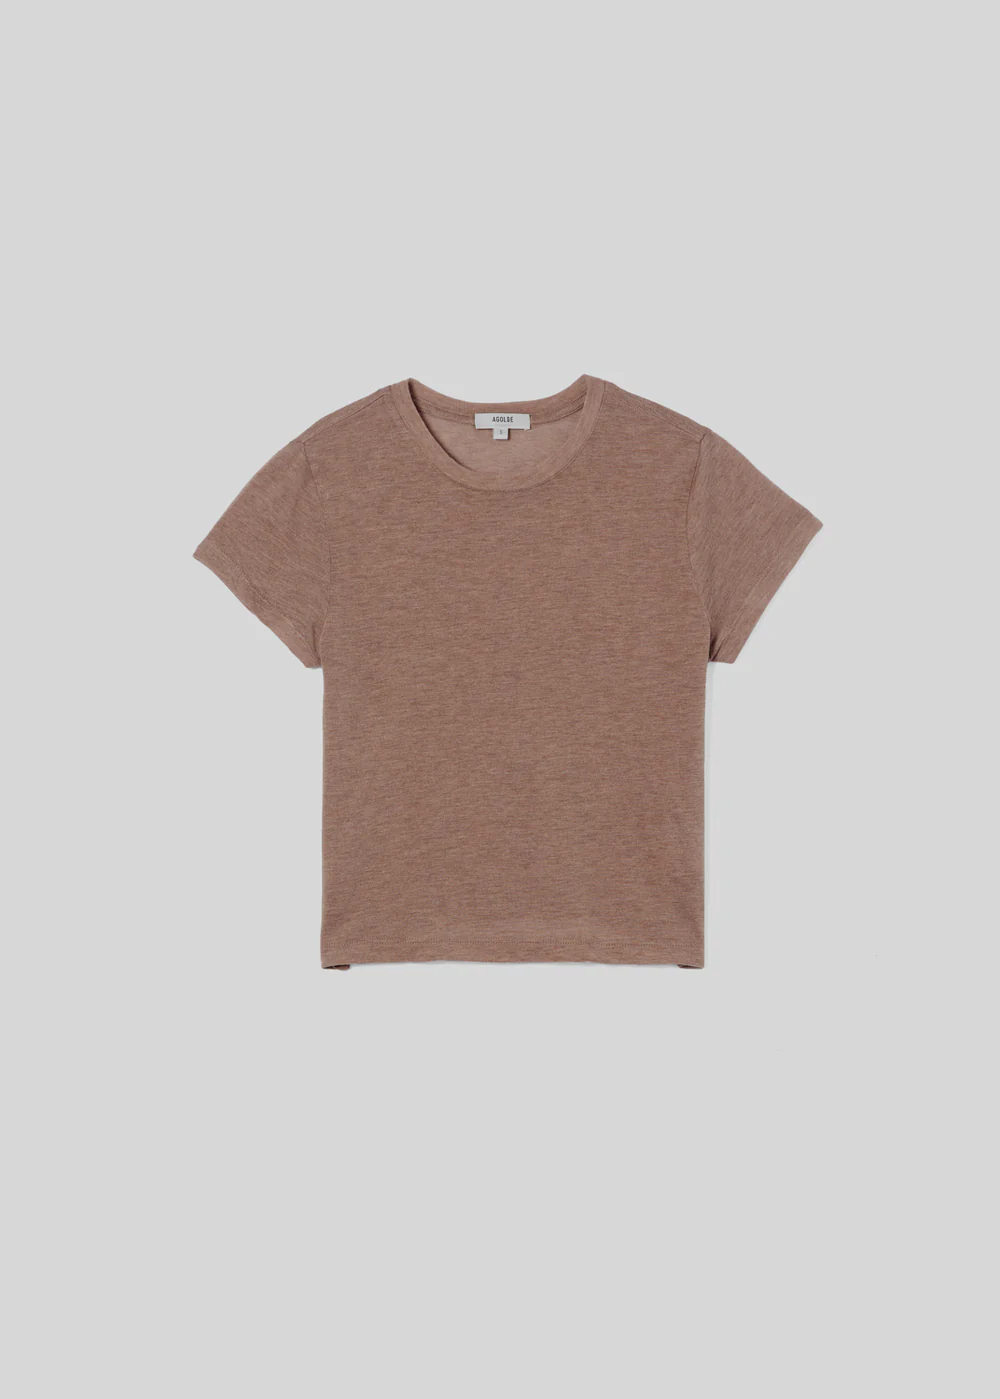 Front view of the Adine Shrunken Tee from AGOLDE in Chai Heather.